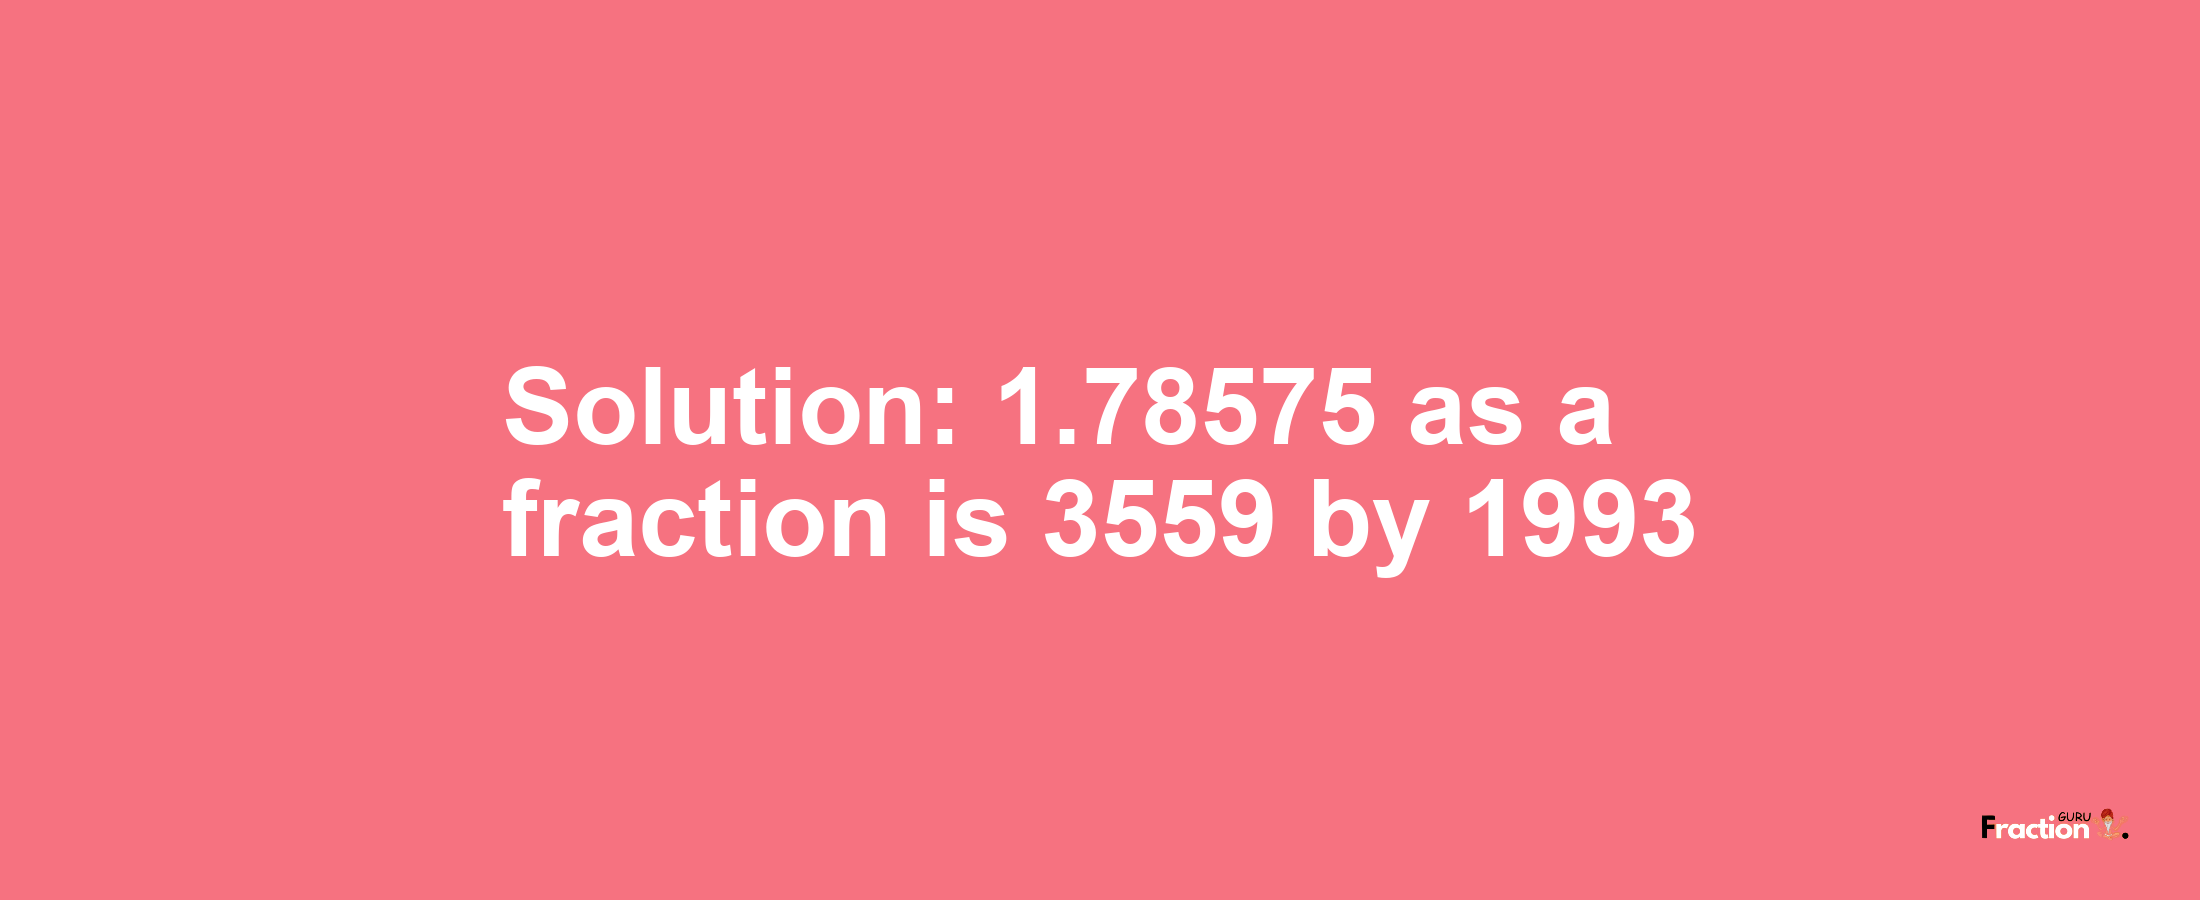 Solution:1.78575 as a fraction is 3559/1993